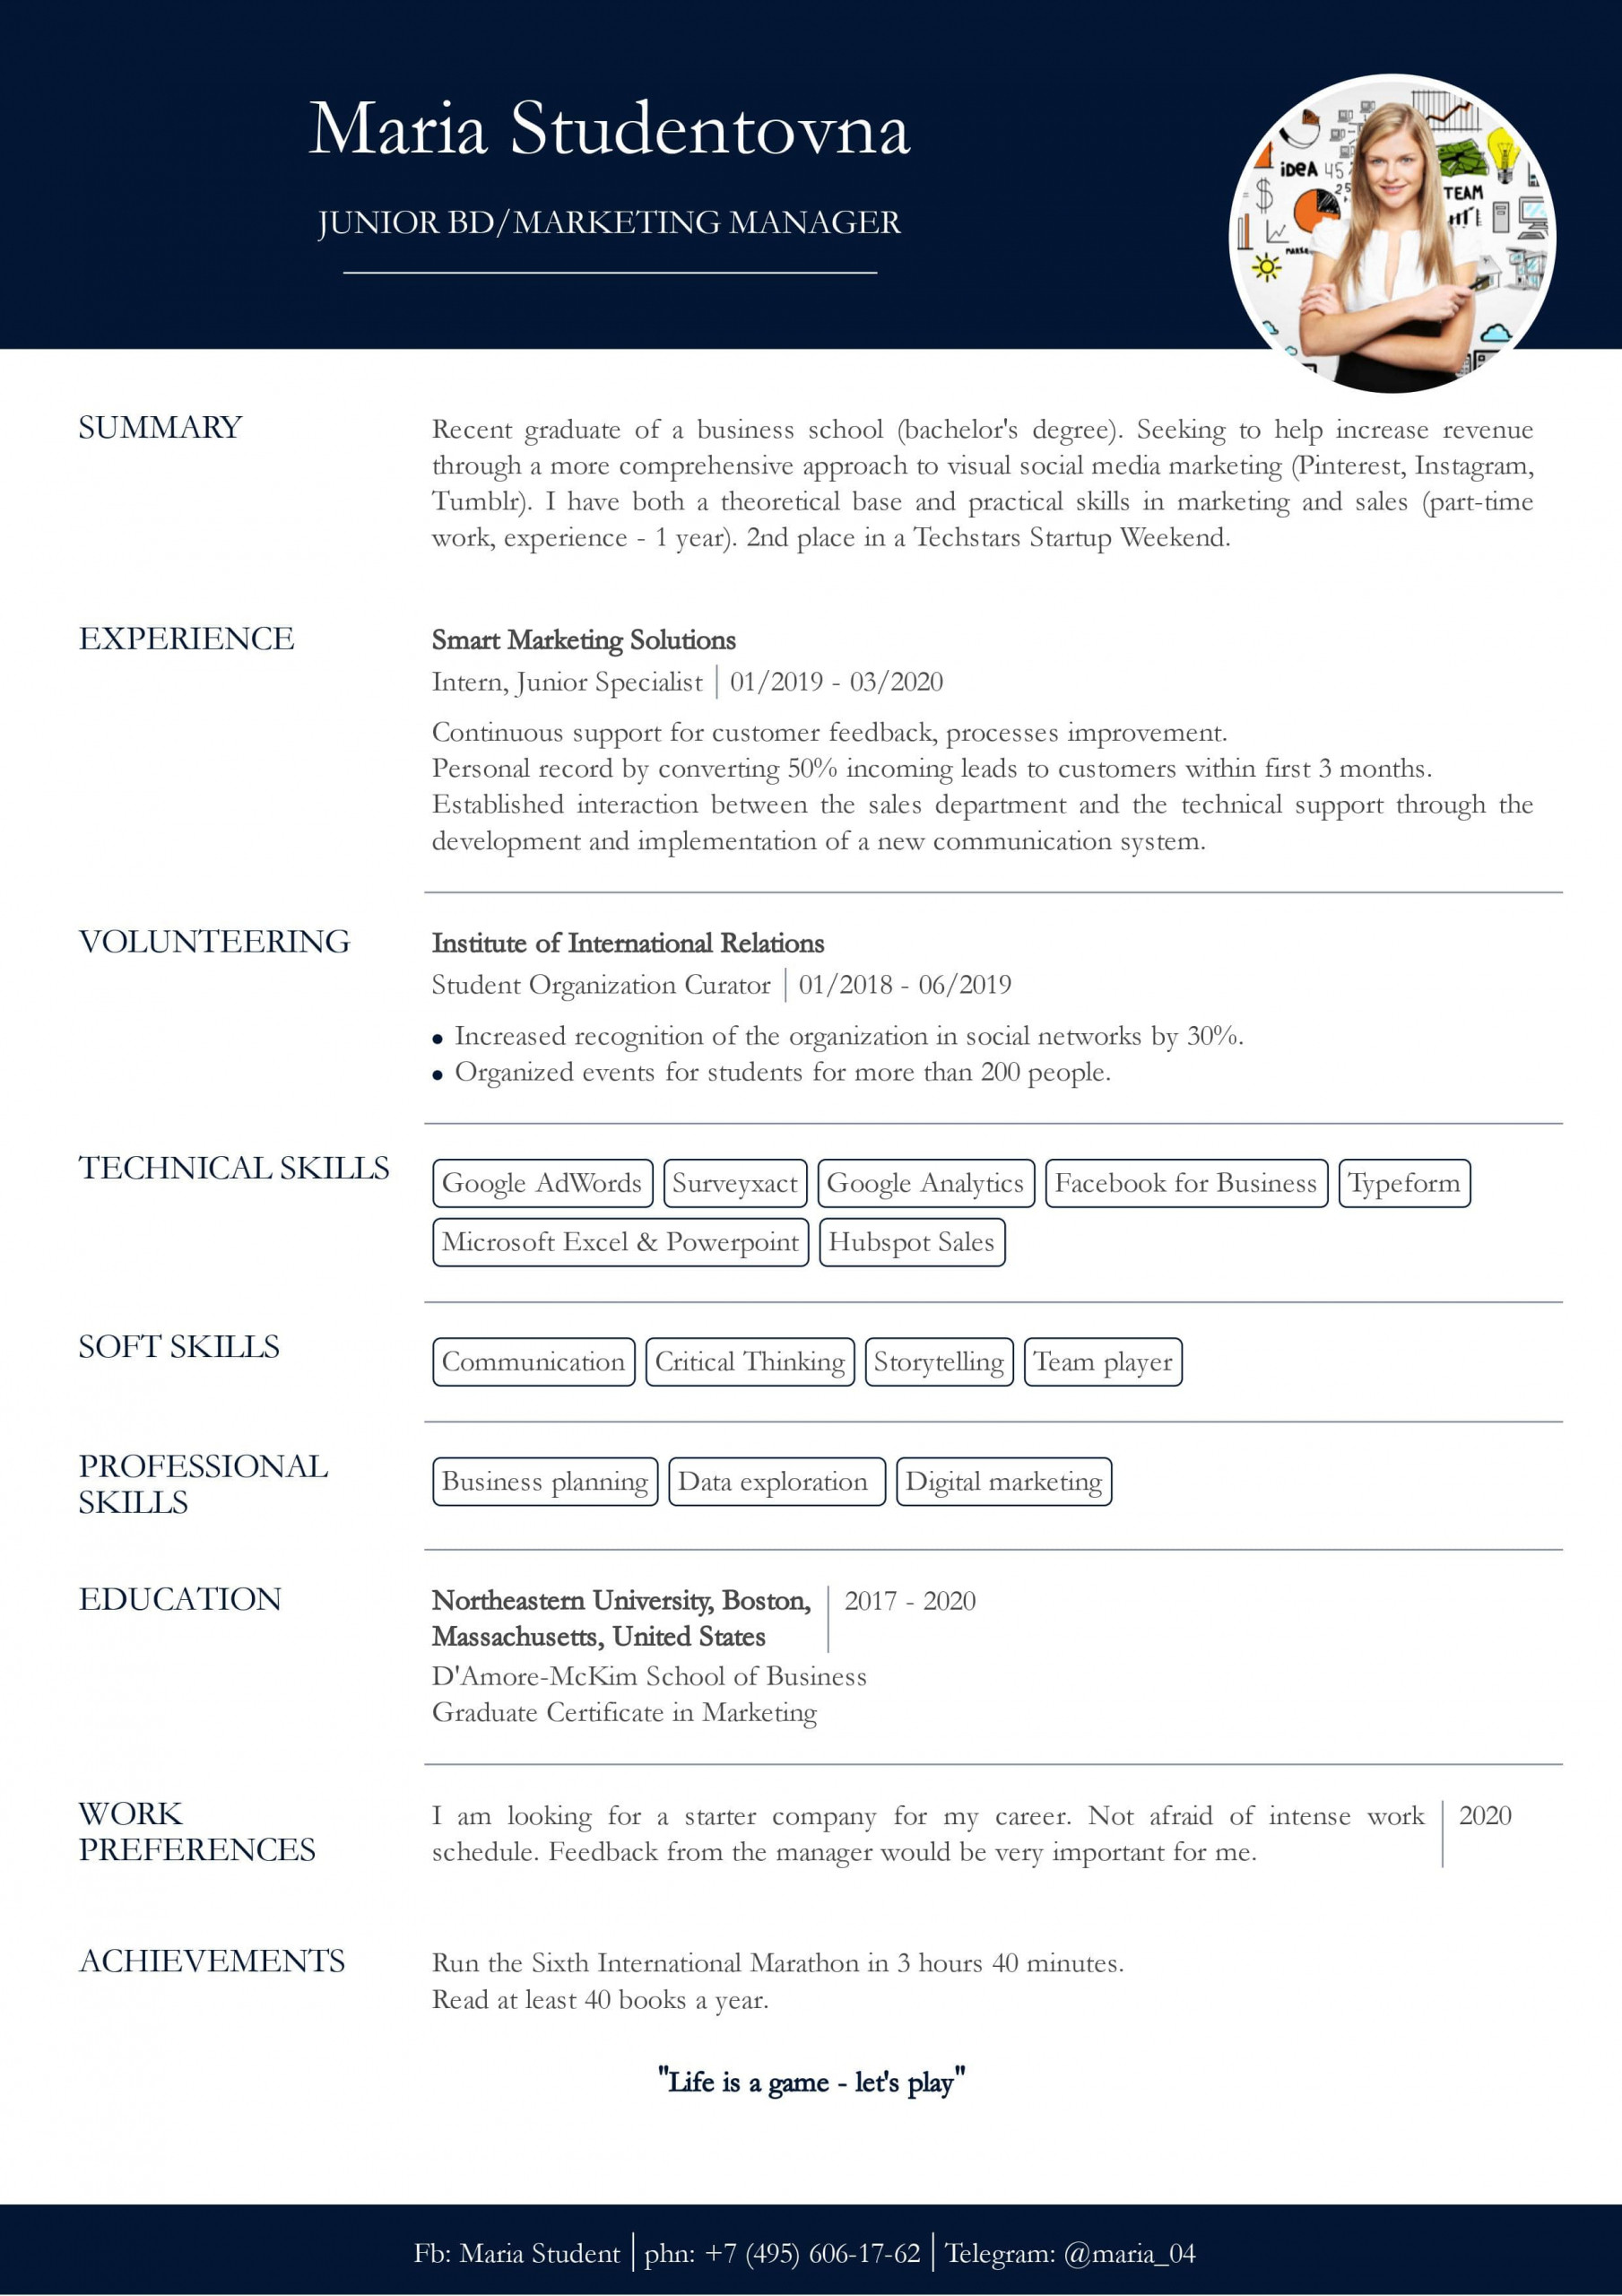 Sample Resume for Online English Tutor without Experience Resume with No Work Experience. Sample for Students. – Cv2you Blog